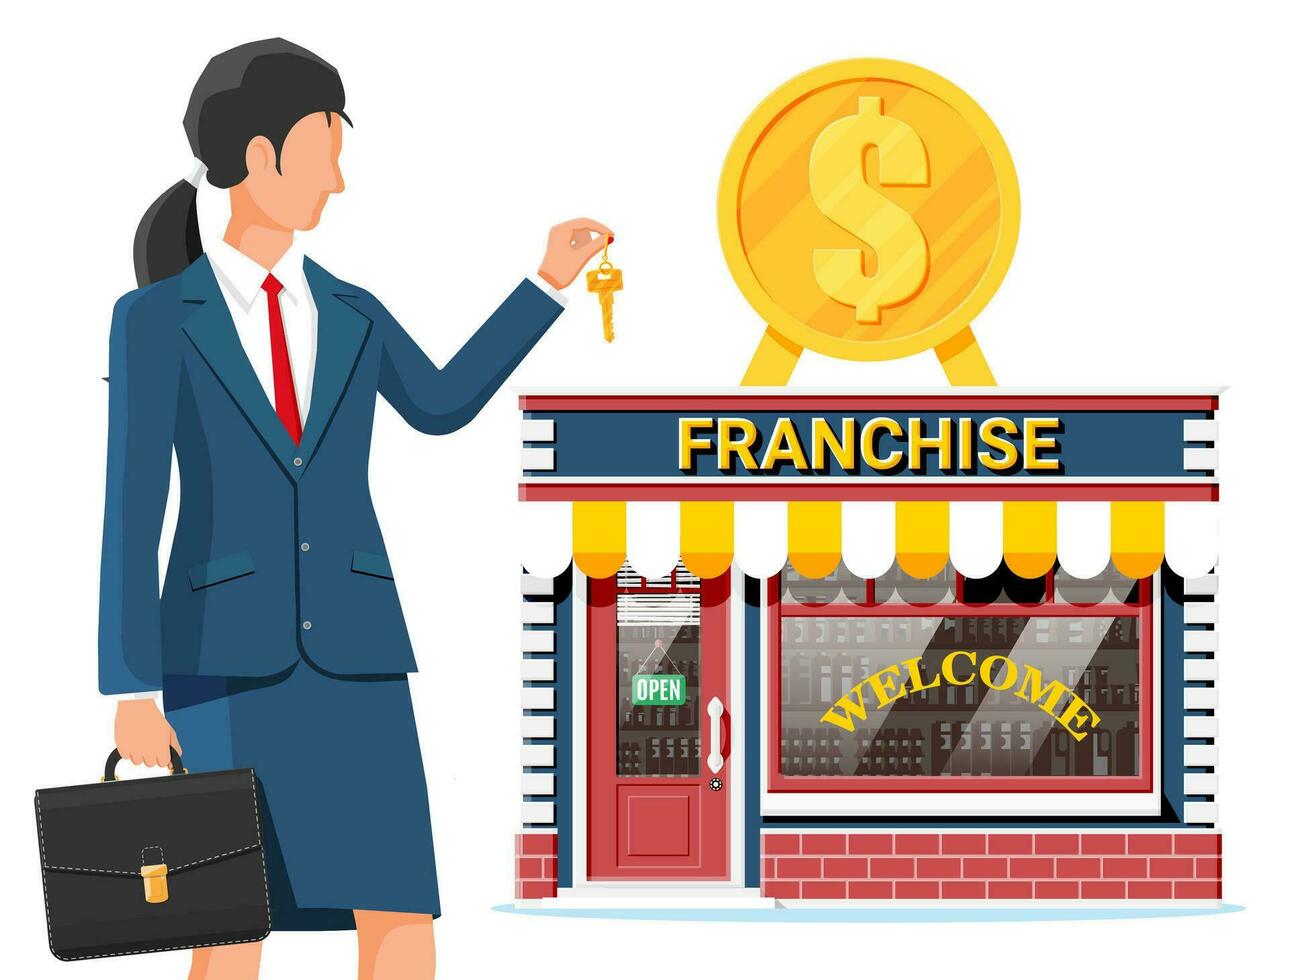 Franchise business for sale. Franchising shop building or commercial property. Real estate business promotional, sme startup crowdfunding. Selling buying new business. Flat vector illustration